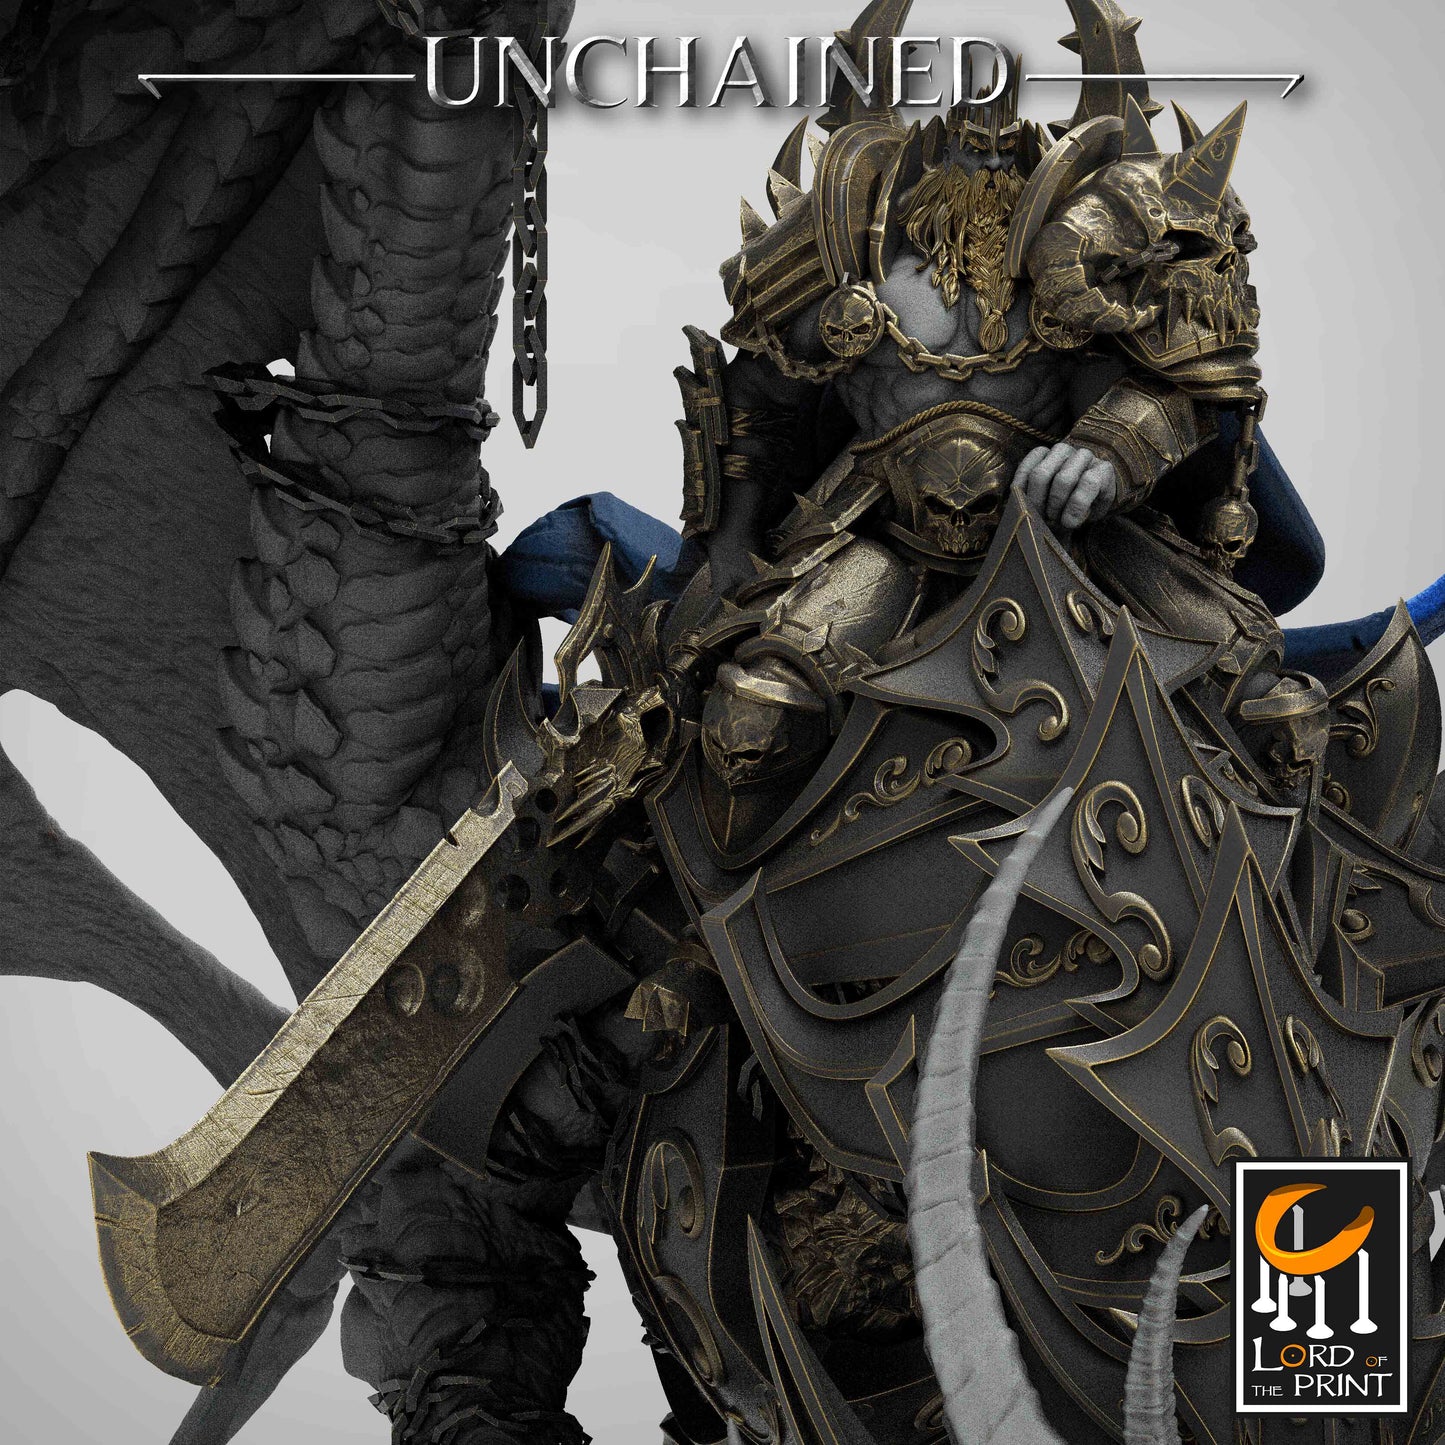 Unchained Dragon- UNCHAINED ARMY